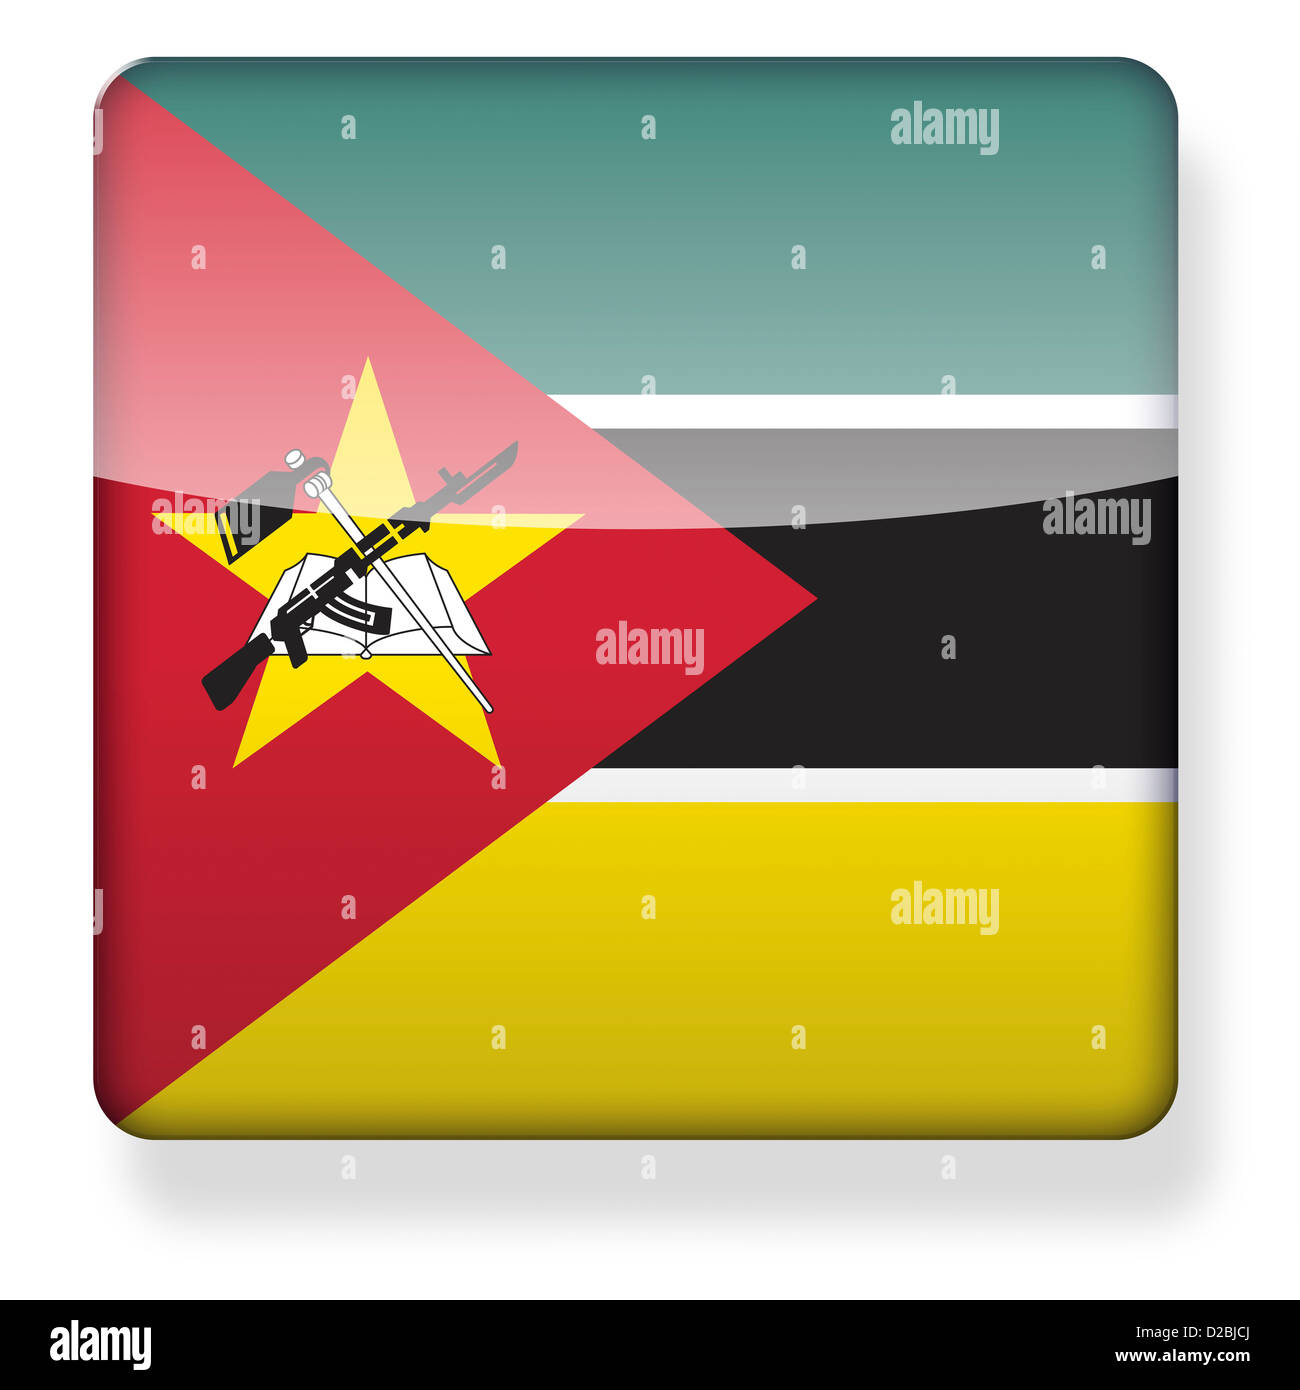 Mozambique flag as an app icon. Clipping path included. Stock Photo